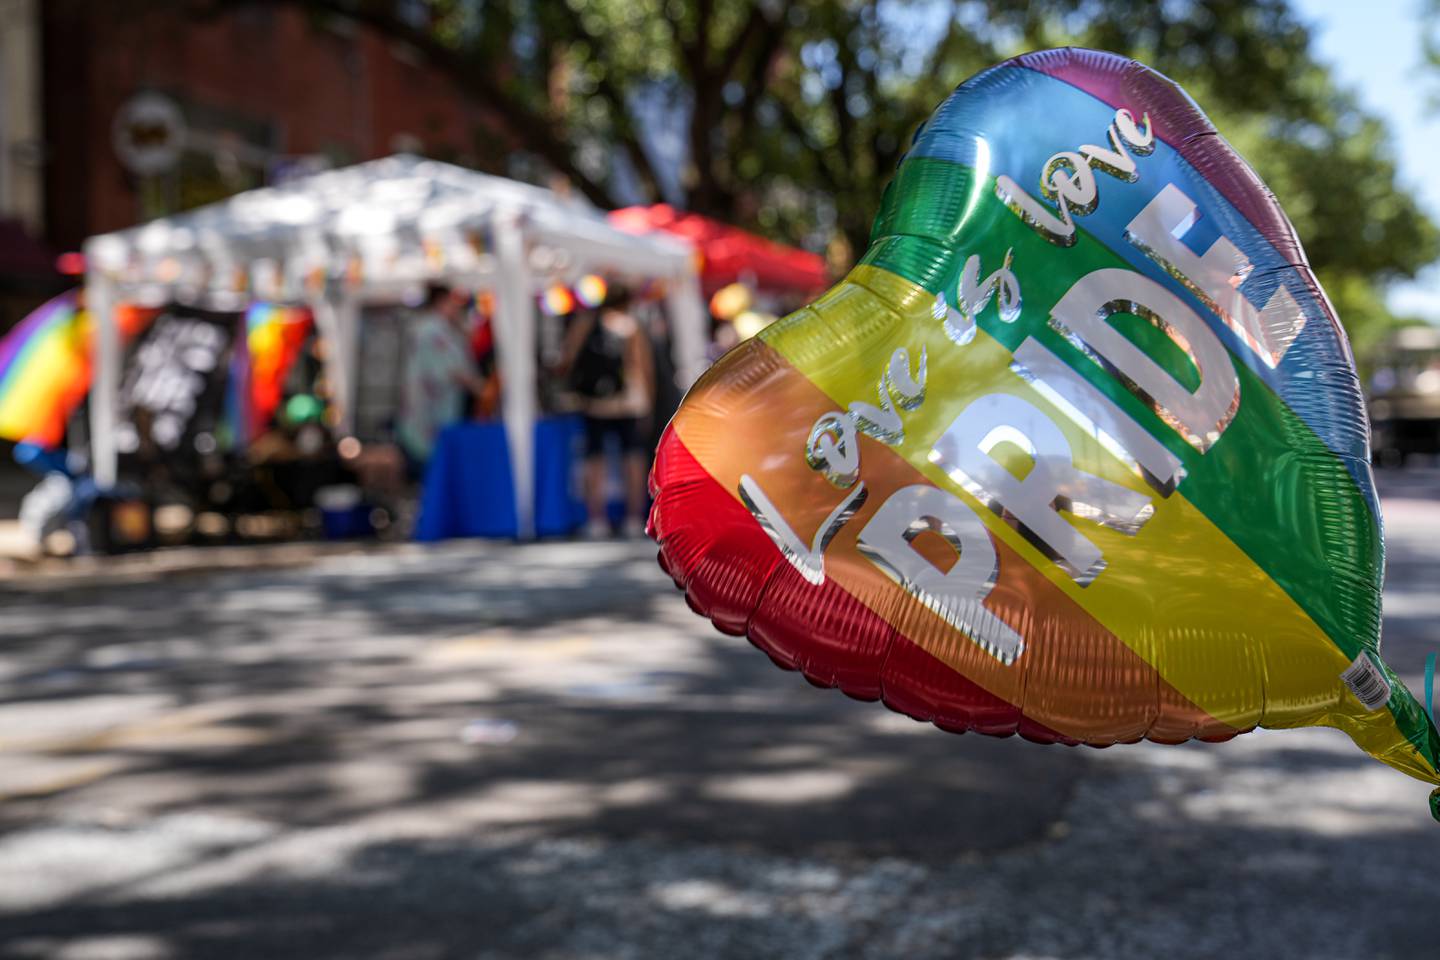 A balloon reading “Love is love, pride” waves in the wind on June 4 at Baltimore Trans Pride 2022.